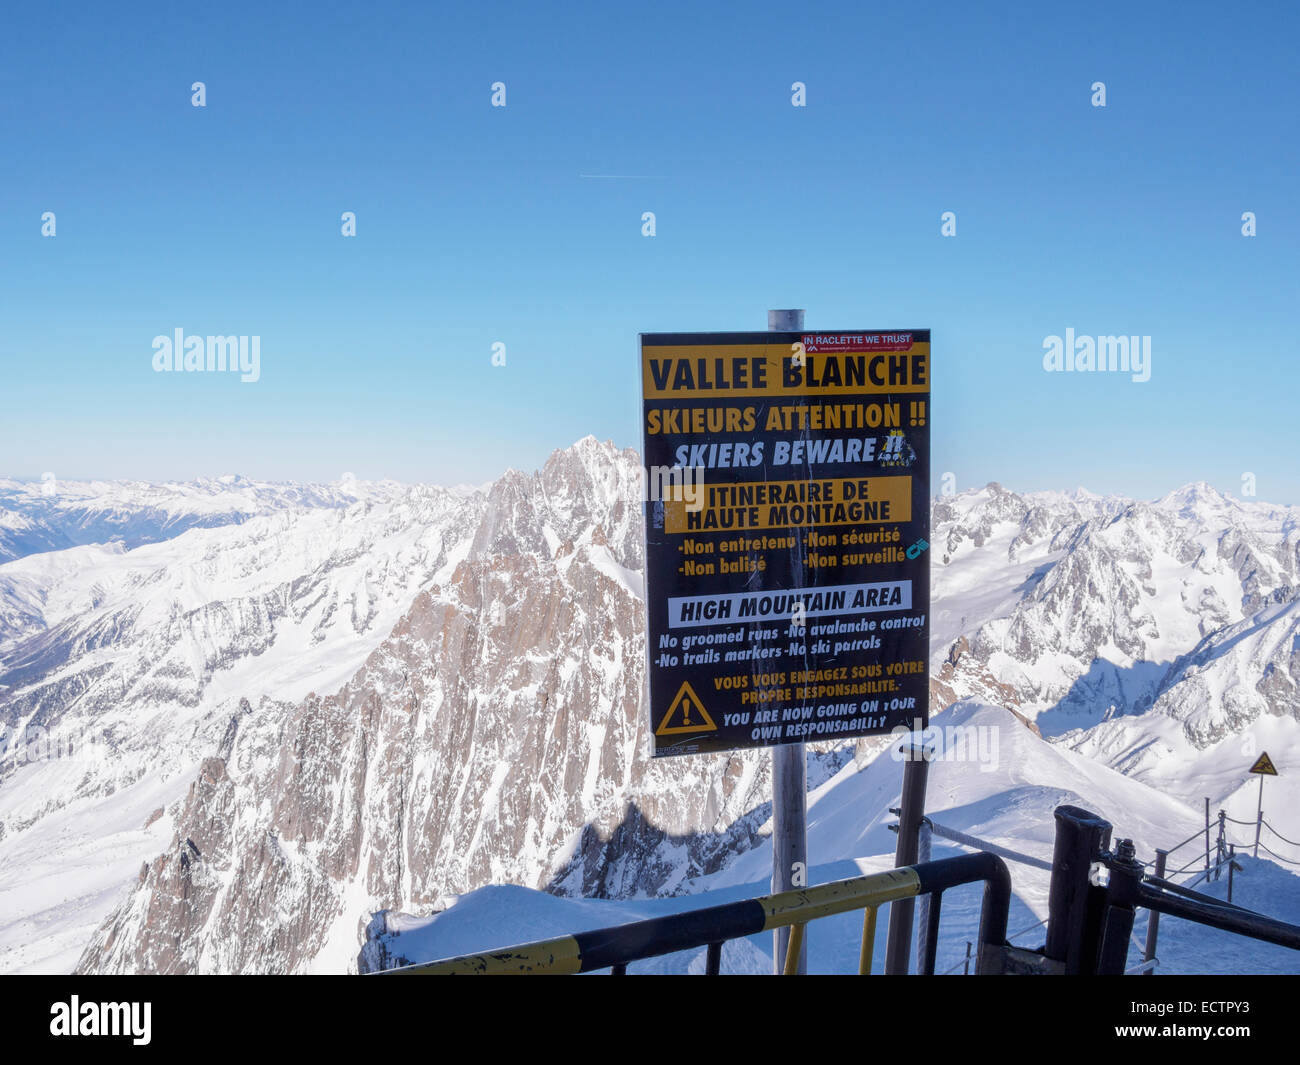 Warning sign for skiers by route to Vallee Blanche on Aiguille du Midi in French Alps. Chamonix-Mont-Blanc, Rhone-Alpes, France Stock Photo